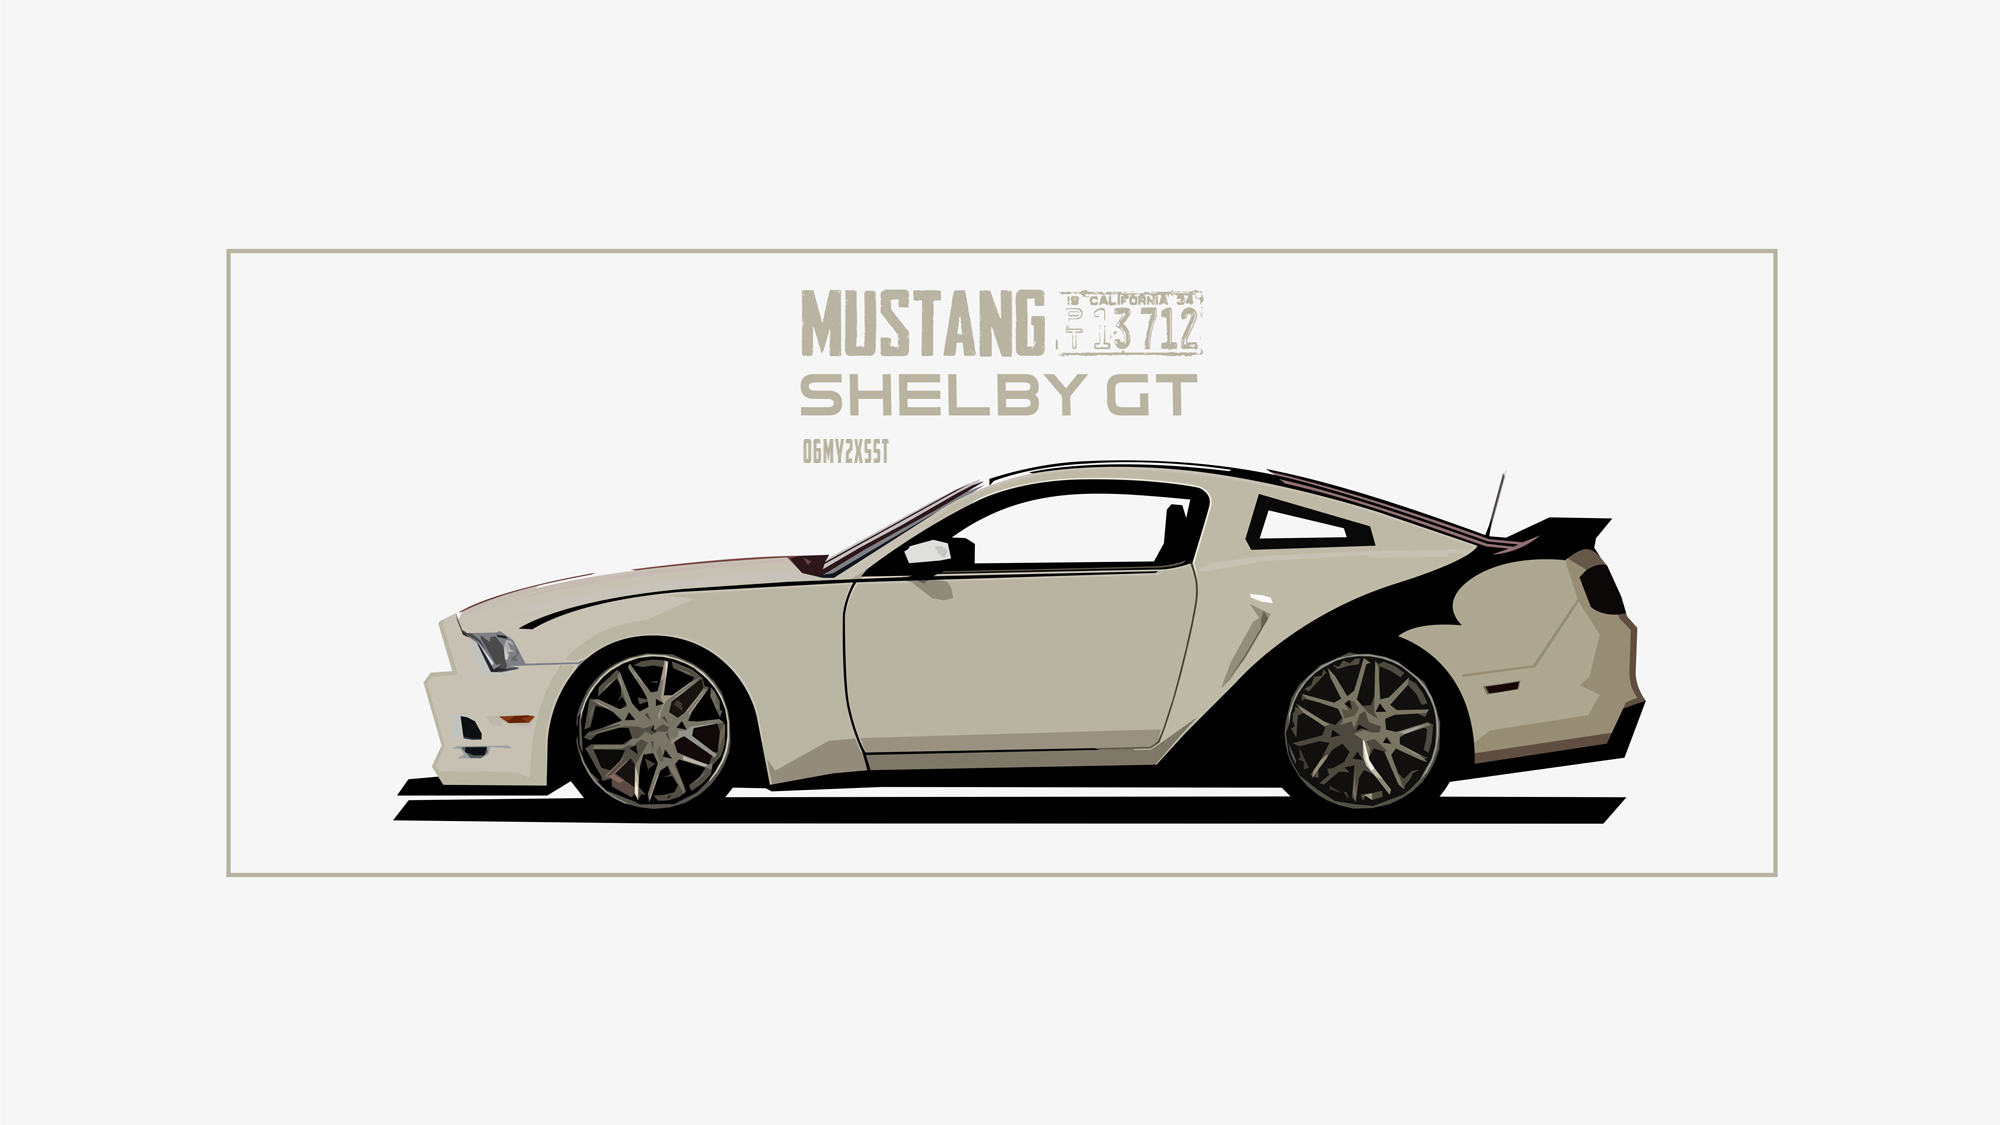 vehicles, ford mustang shelby, black & white, car, ford mustang shelby gt, ford mustang, ford iphone wallpaper